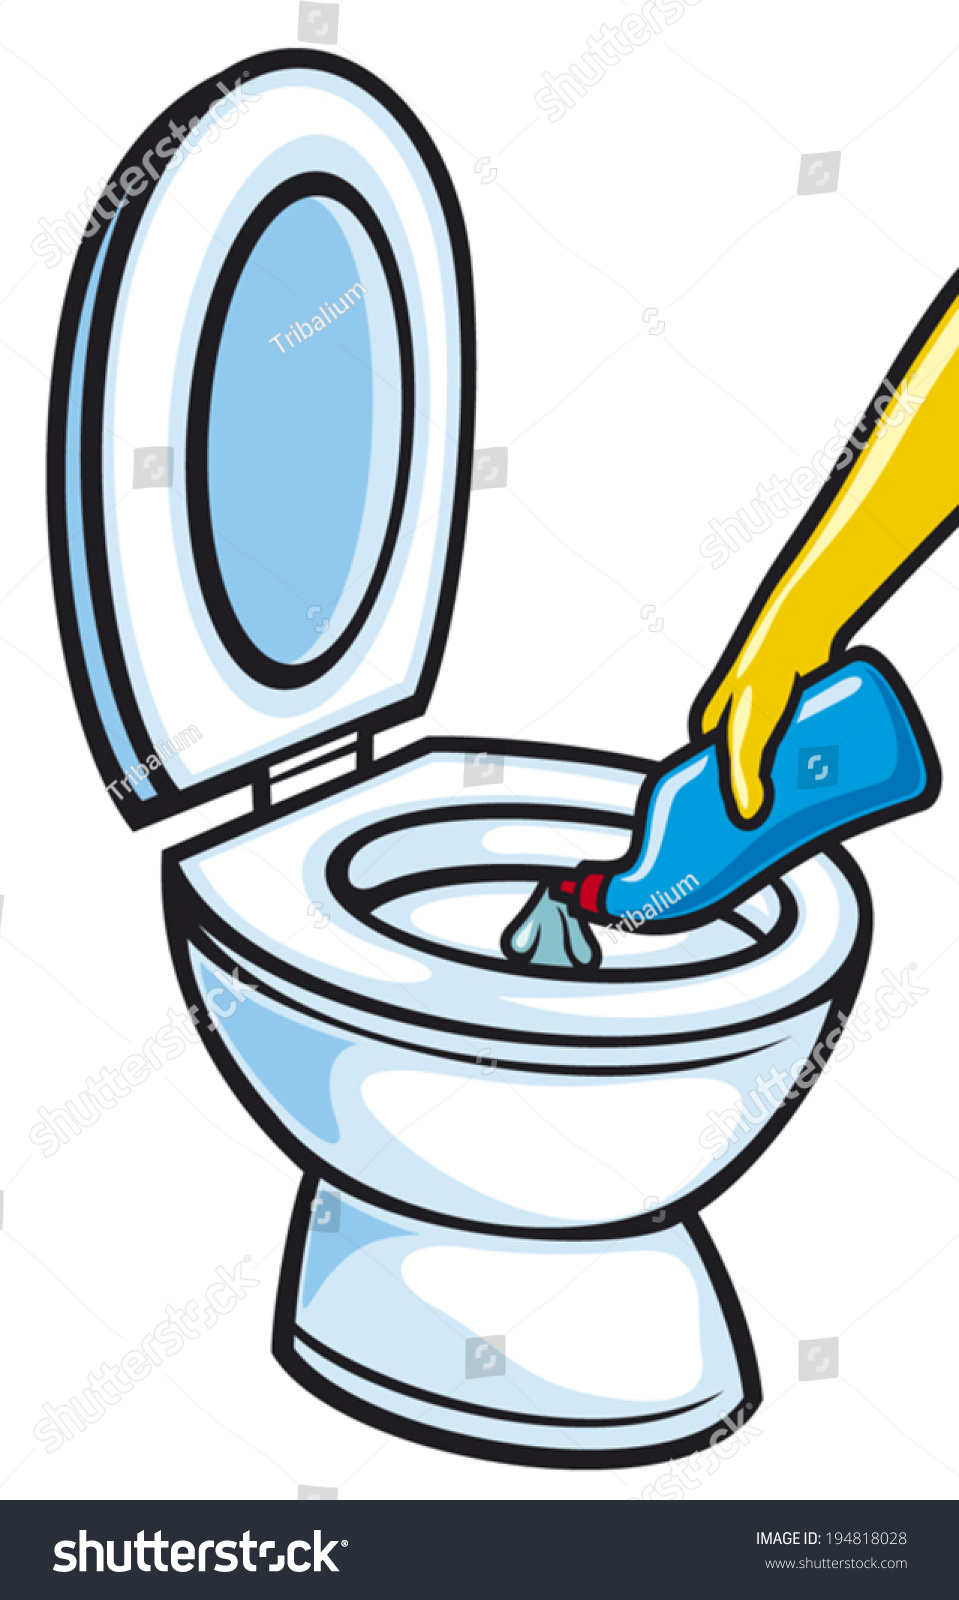 toilet cleaning clipart - photo #19